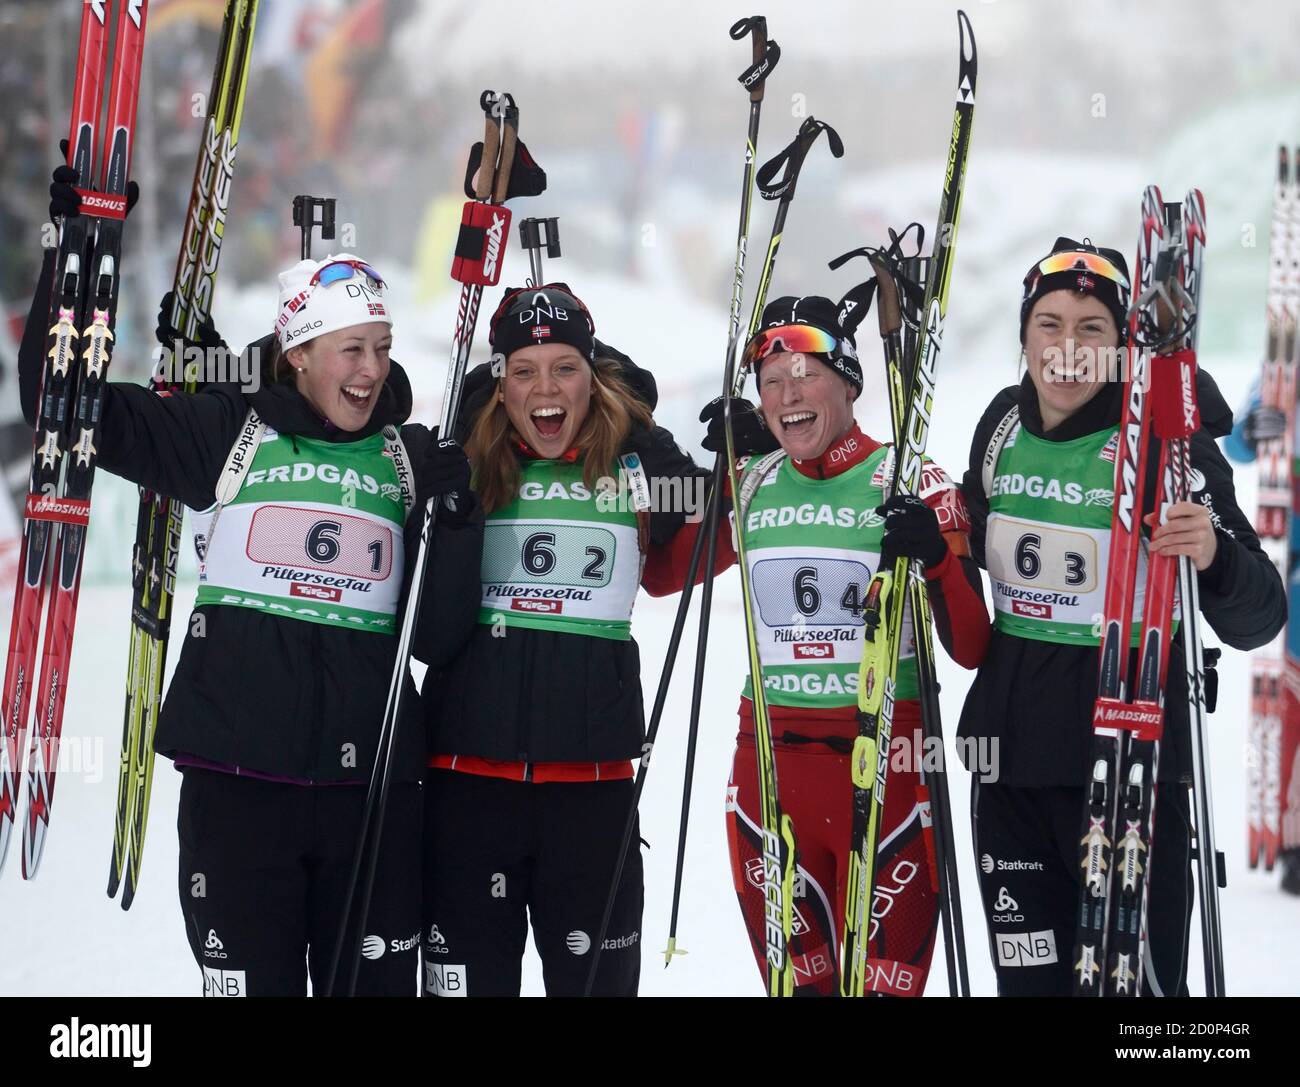 Norway's athletes Fanny Welle-Strand Horn, Elise Ringen, Tora Berger and  Synnoeve Solemdal (L-R) pose after the women's 4x6km relay at the Biathlon  World Cup in Hochfilzen, December 11, 2011. REUTERS/Heinz-Peter Bader  (AUSTRIA -